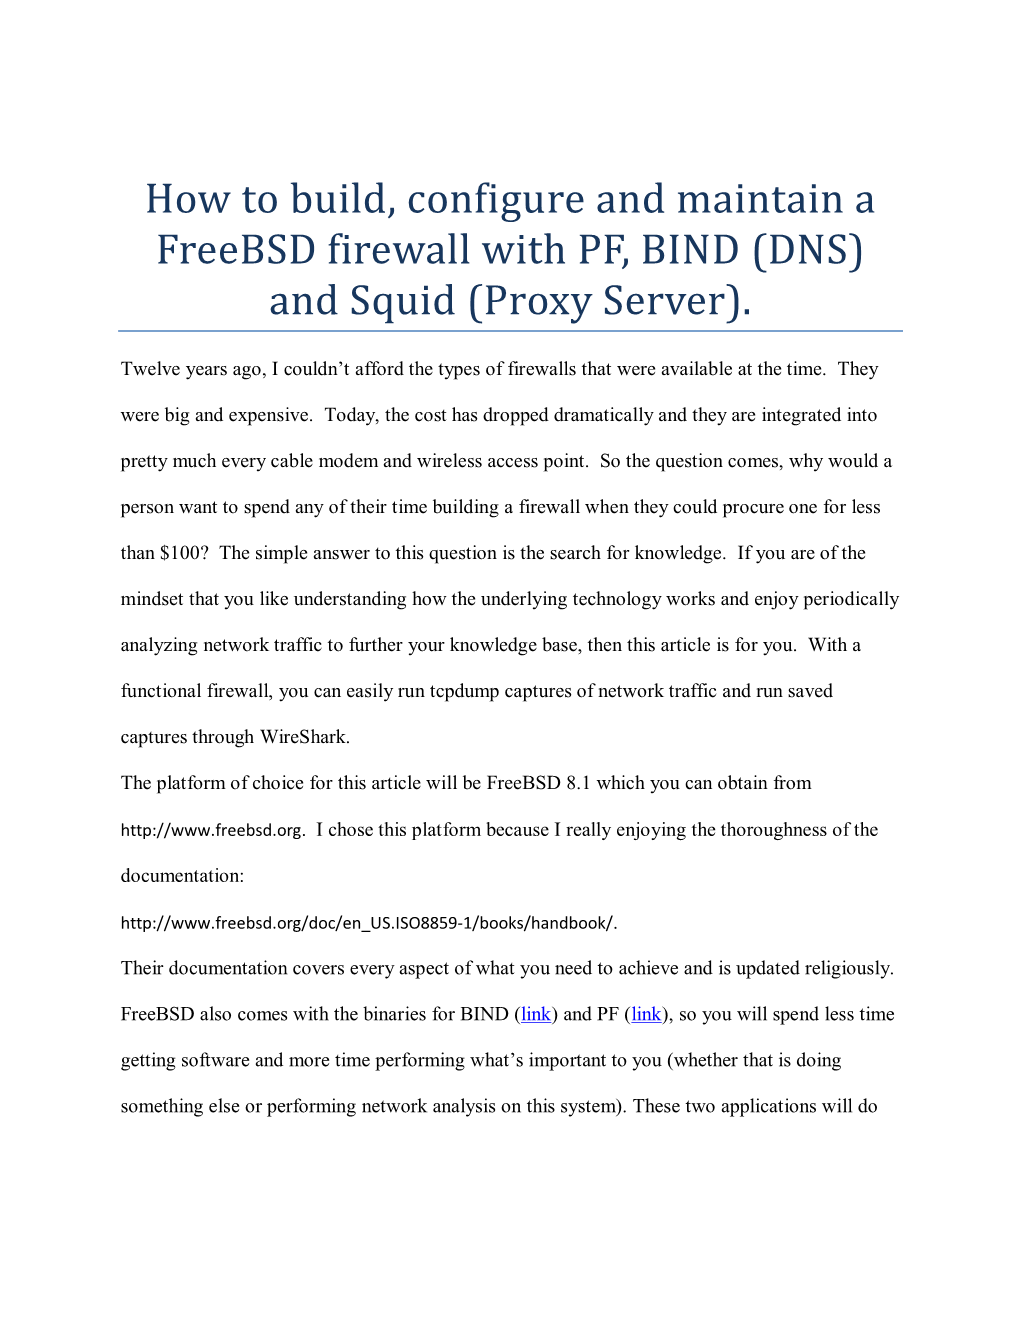 How to Build, Configure and Maintain a Freebsd Firewall with PF, BIND (DNS) and Squid (Proxy Server)